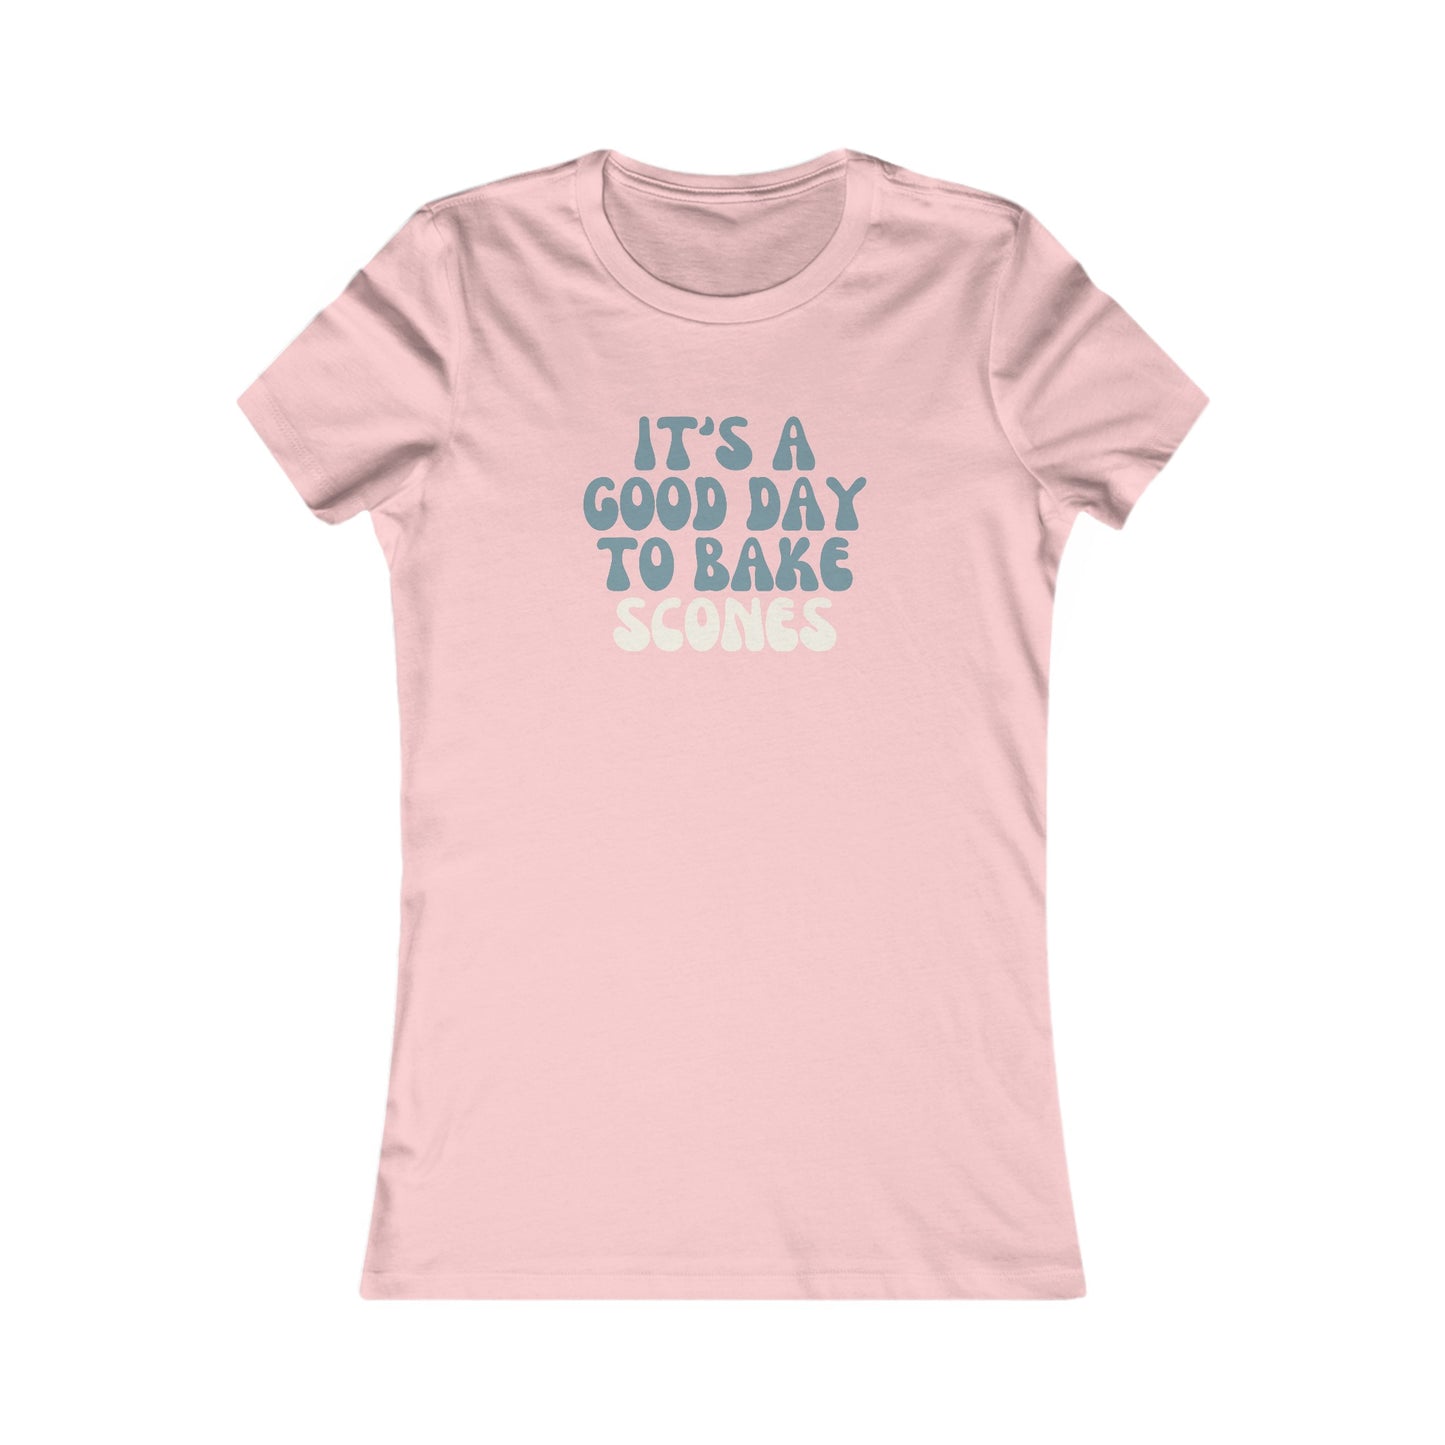 It's a Good Day to Bake Scones Women's T-Shirt